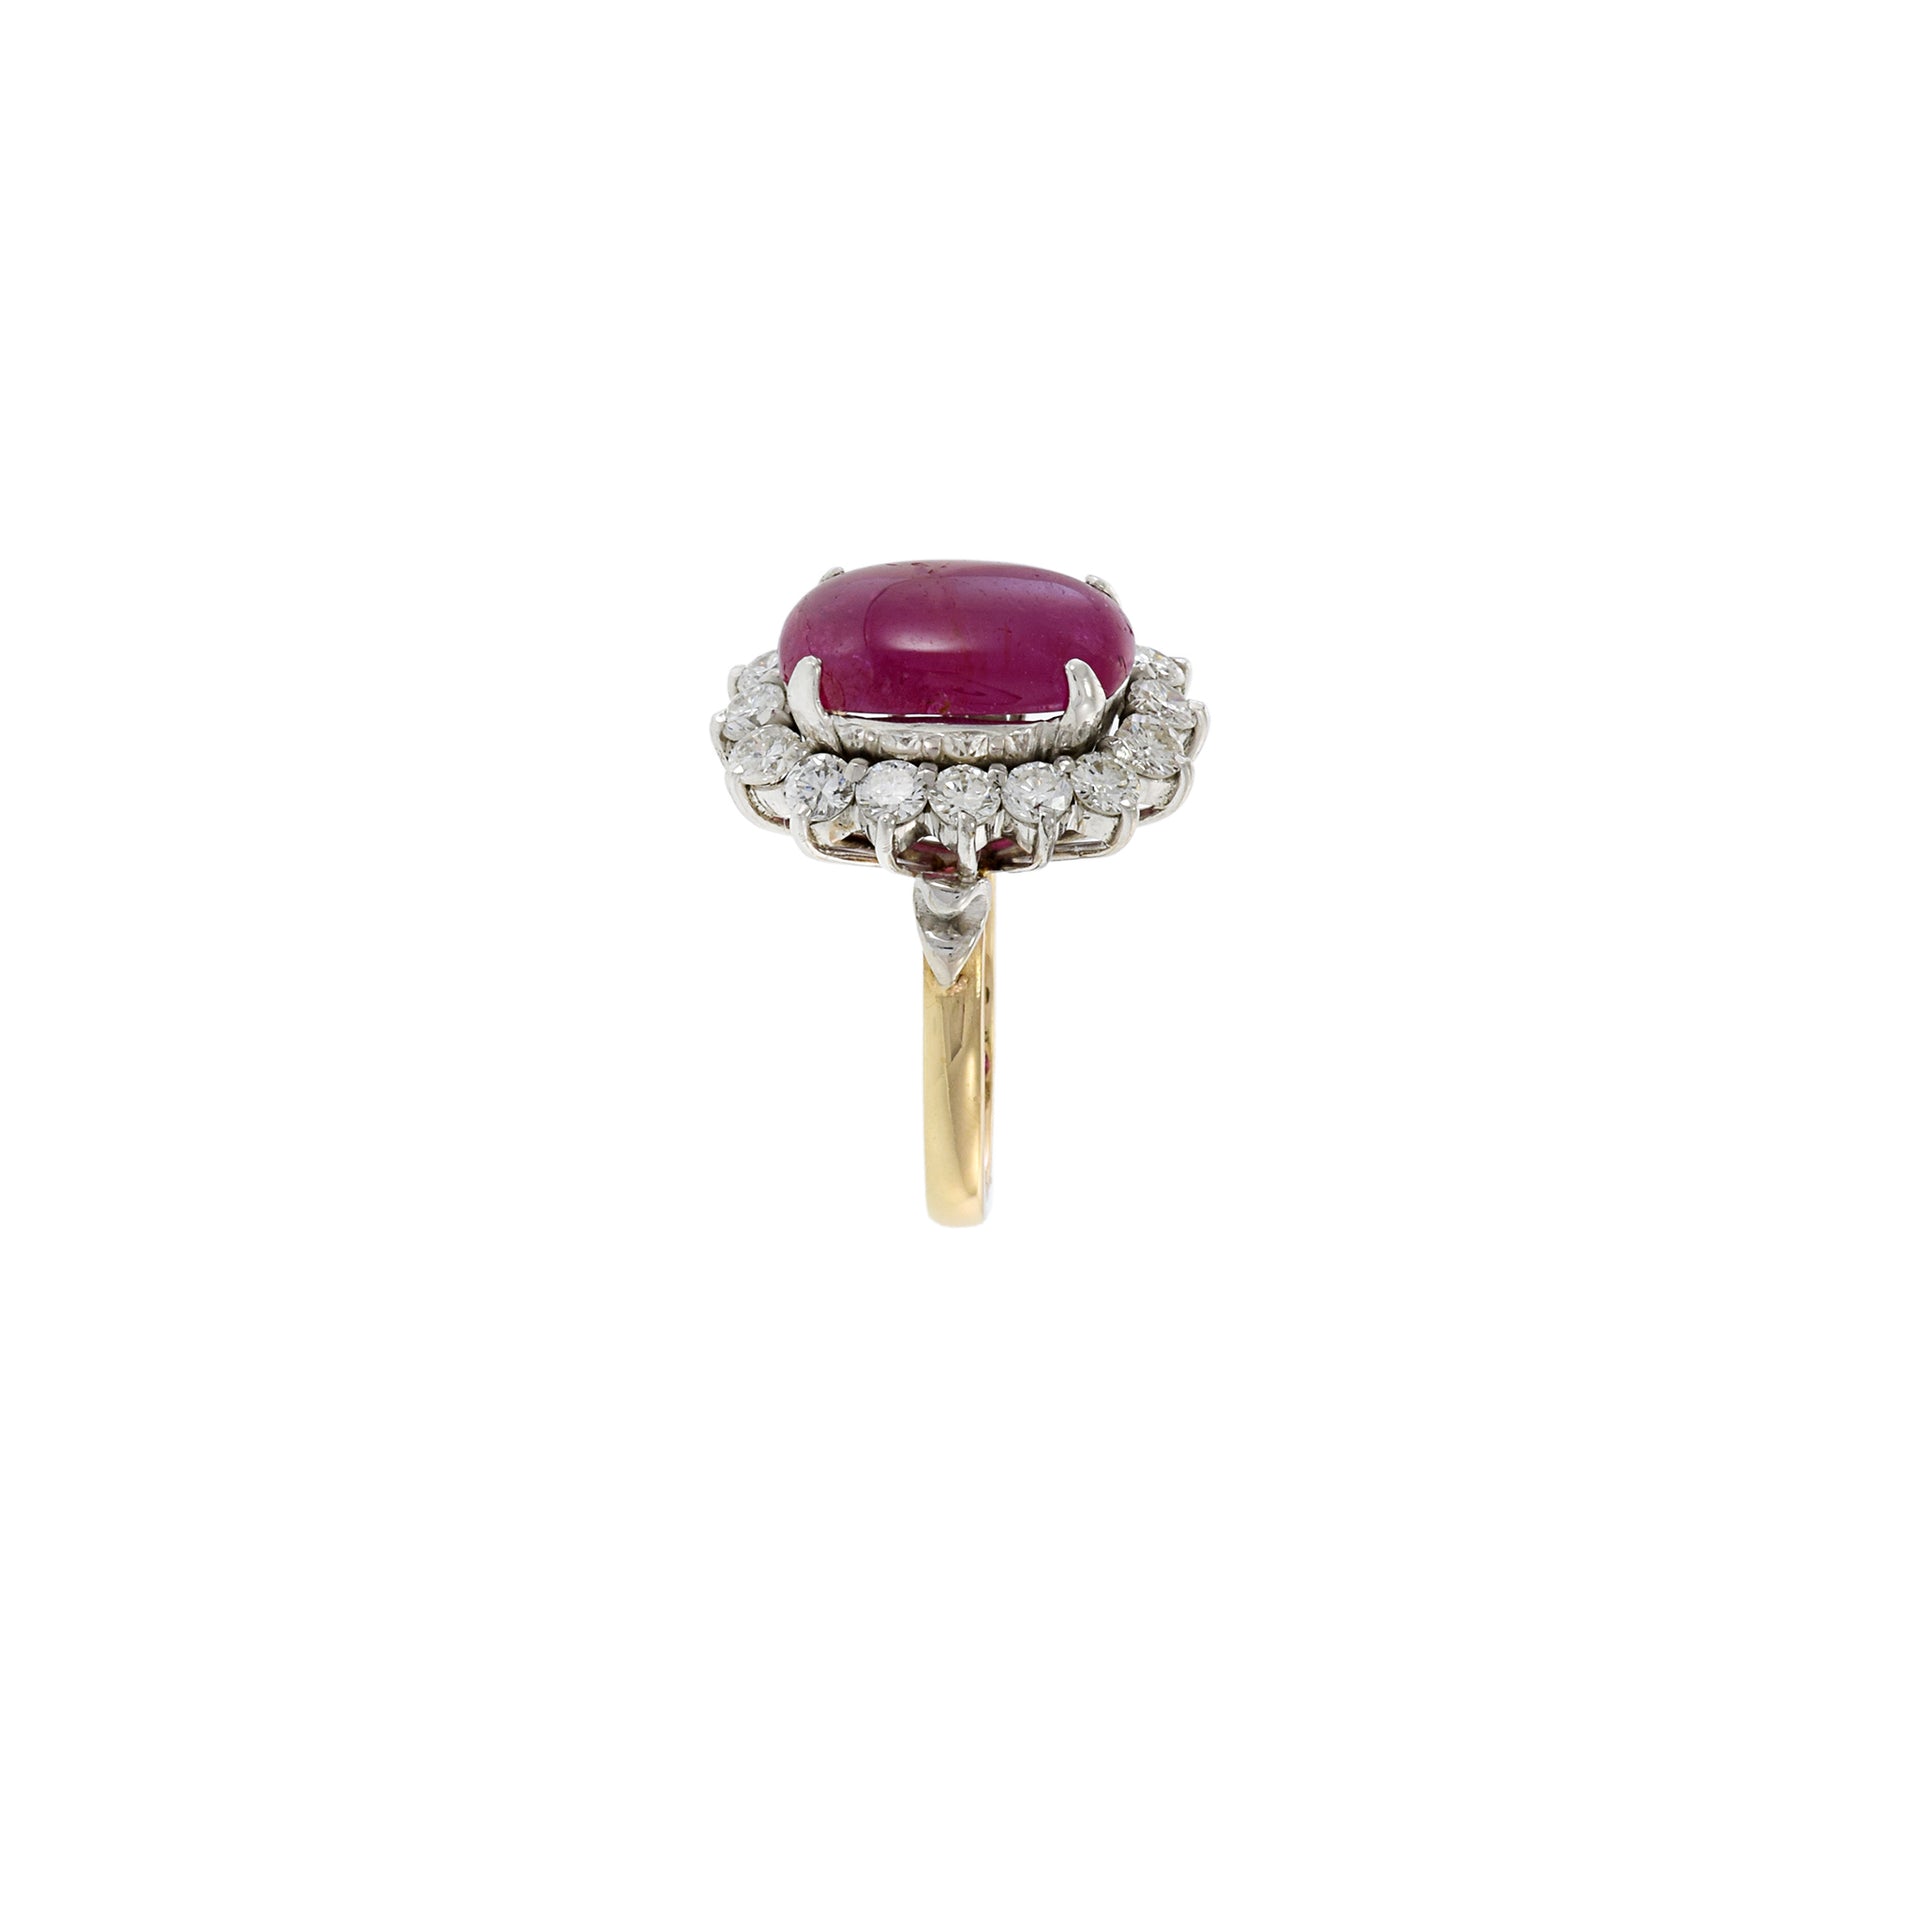 Vintage 14KT Yellow Gold Ruby And Diamond Ring